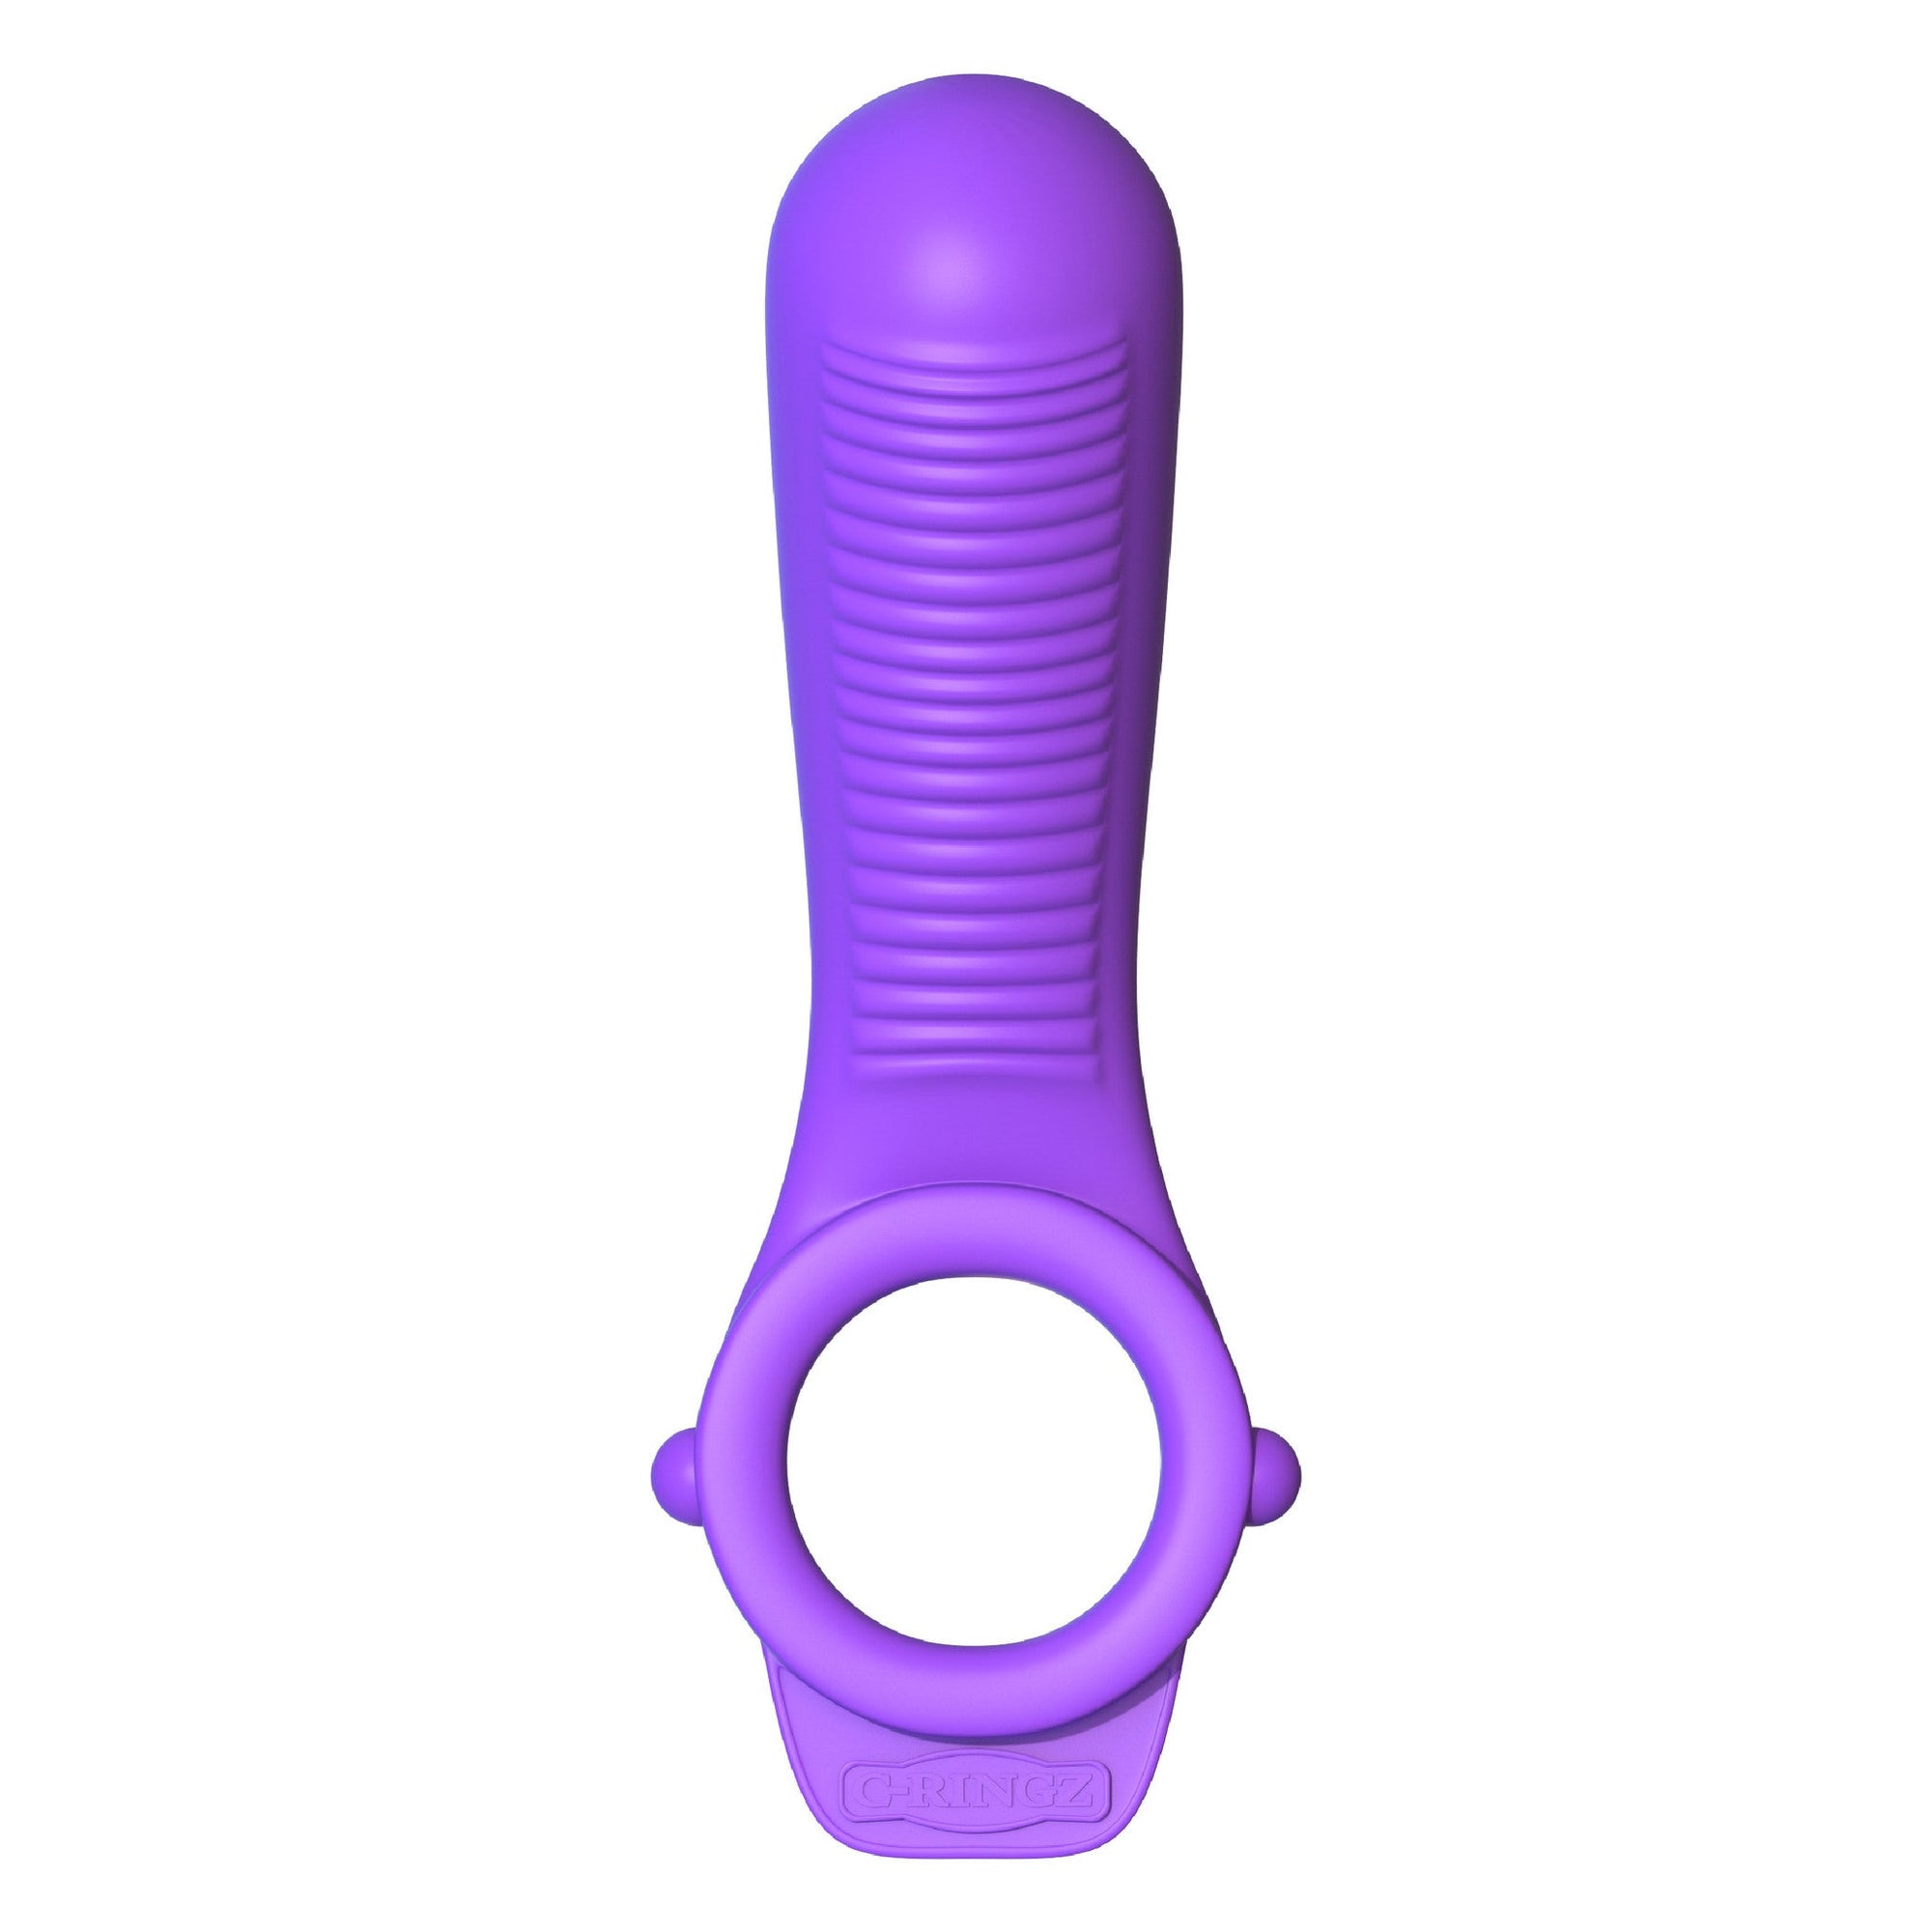 Pipedream - Fantasy C-Ringz Ride N' Glide Couples Cock Ring -  Silicone Cock Ring (Vibration) Non Rechargeable  Durio.sg